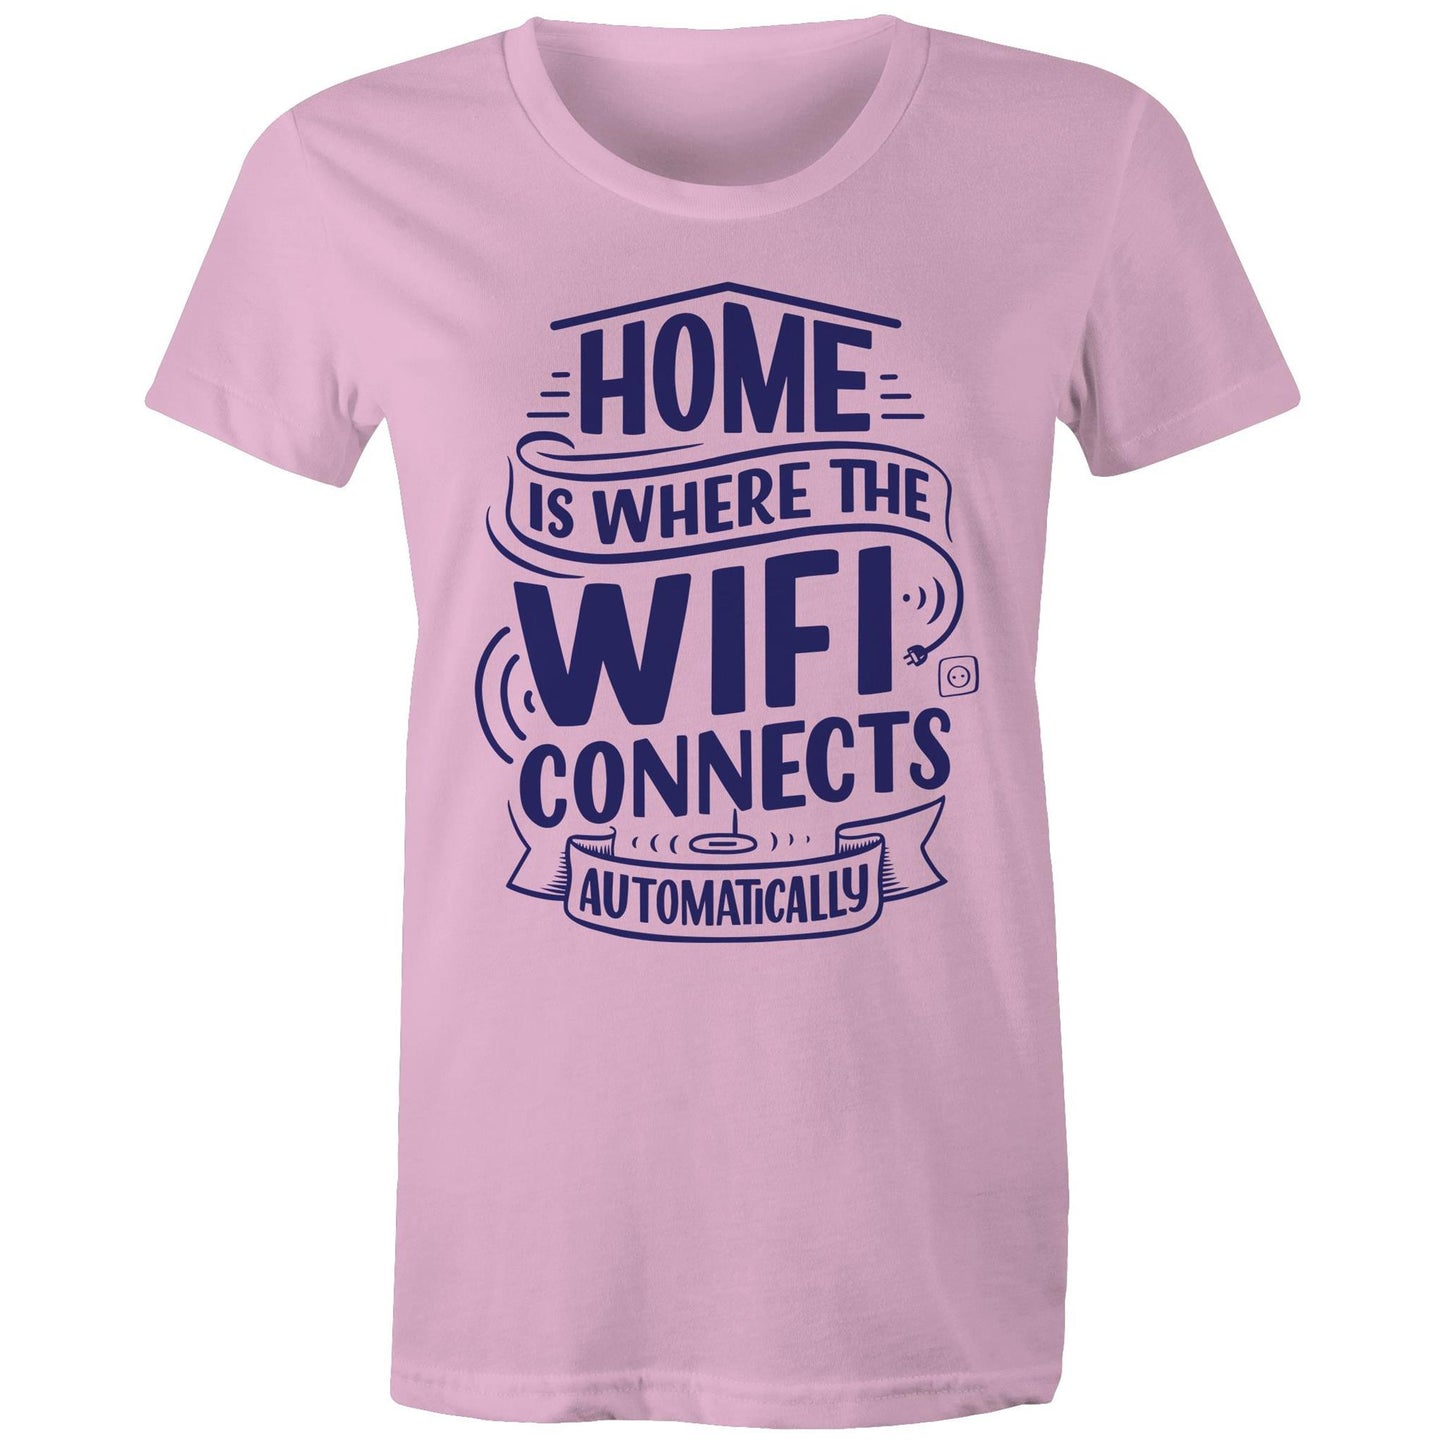 Home Is Where The WIFI Connects Automatically - Womens T-shirt Pink Womens T-shirt Tech